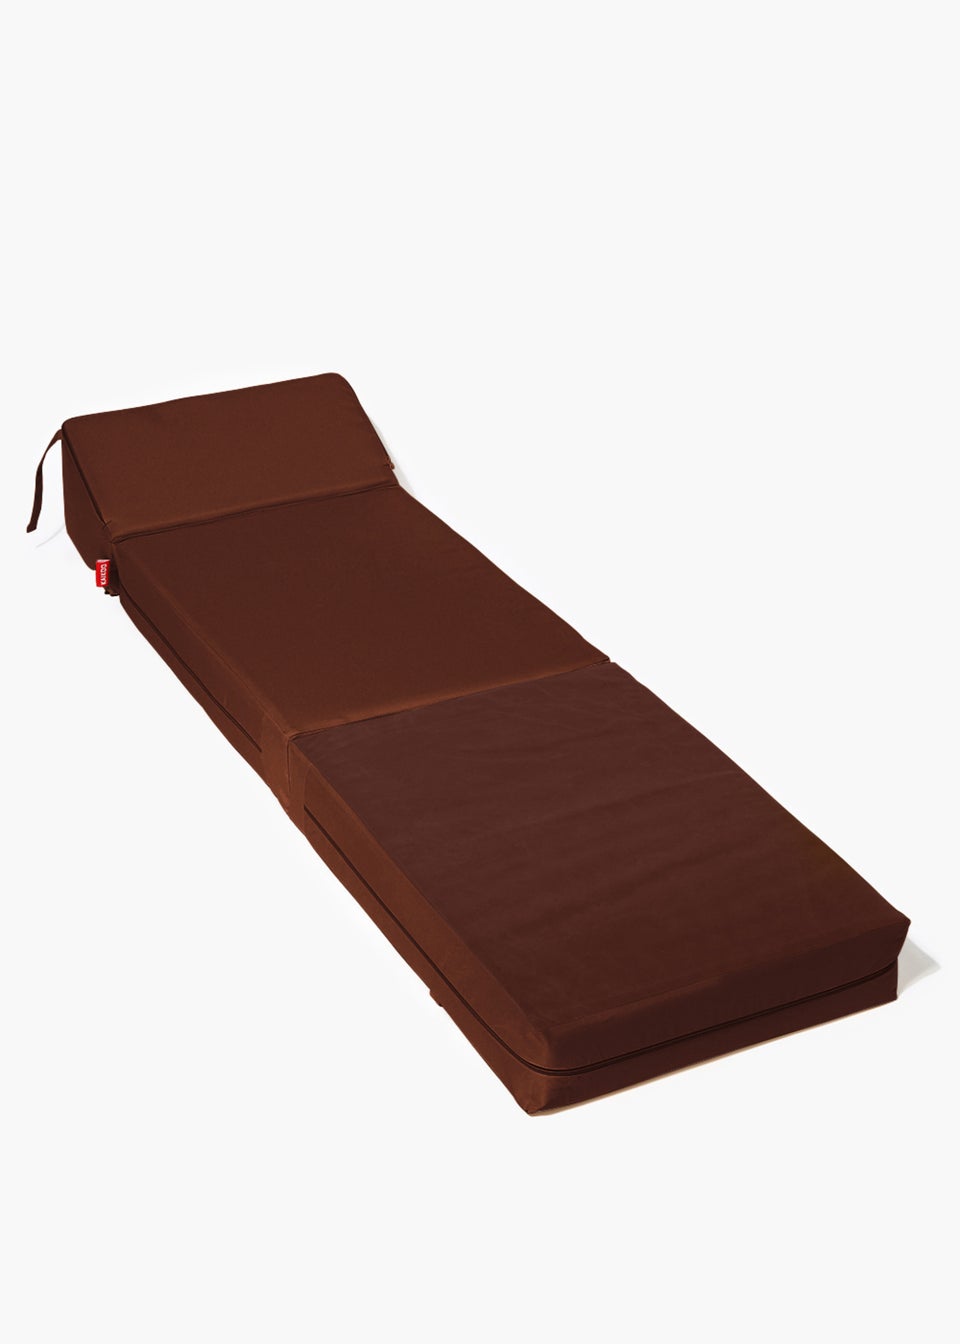 Kaikoo Single Fold-Out Chair Bed Chocolate